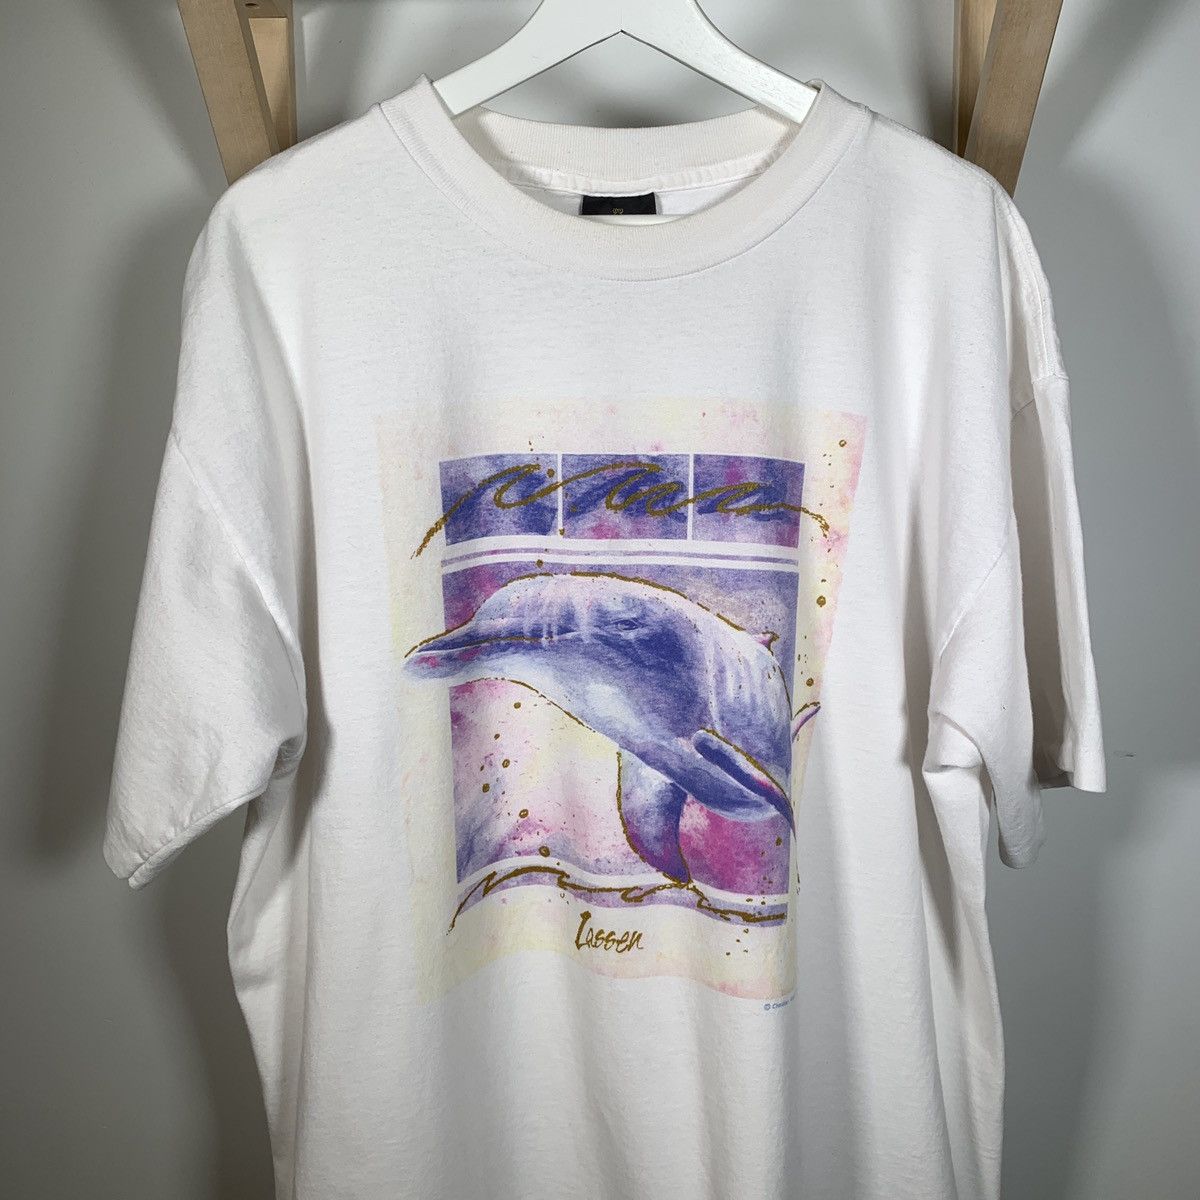 Vintage Vintage 90s Dolphin Animal Whales Ocean T Shirt Made In USA Size US XL / EU 56 / 4 - 2 Preview